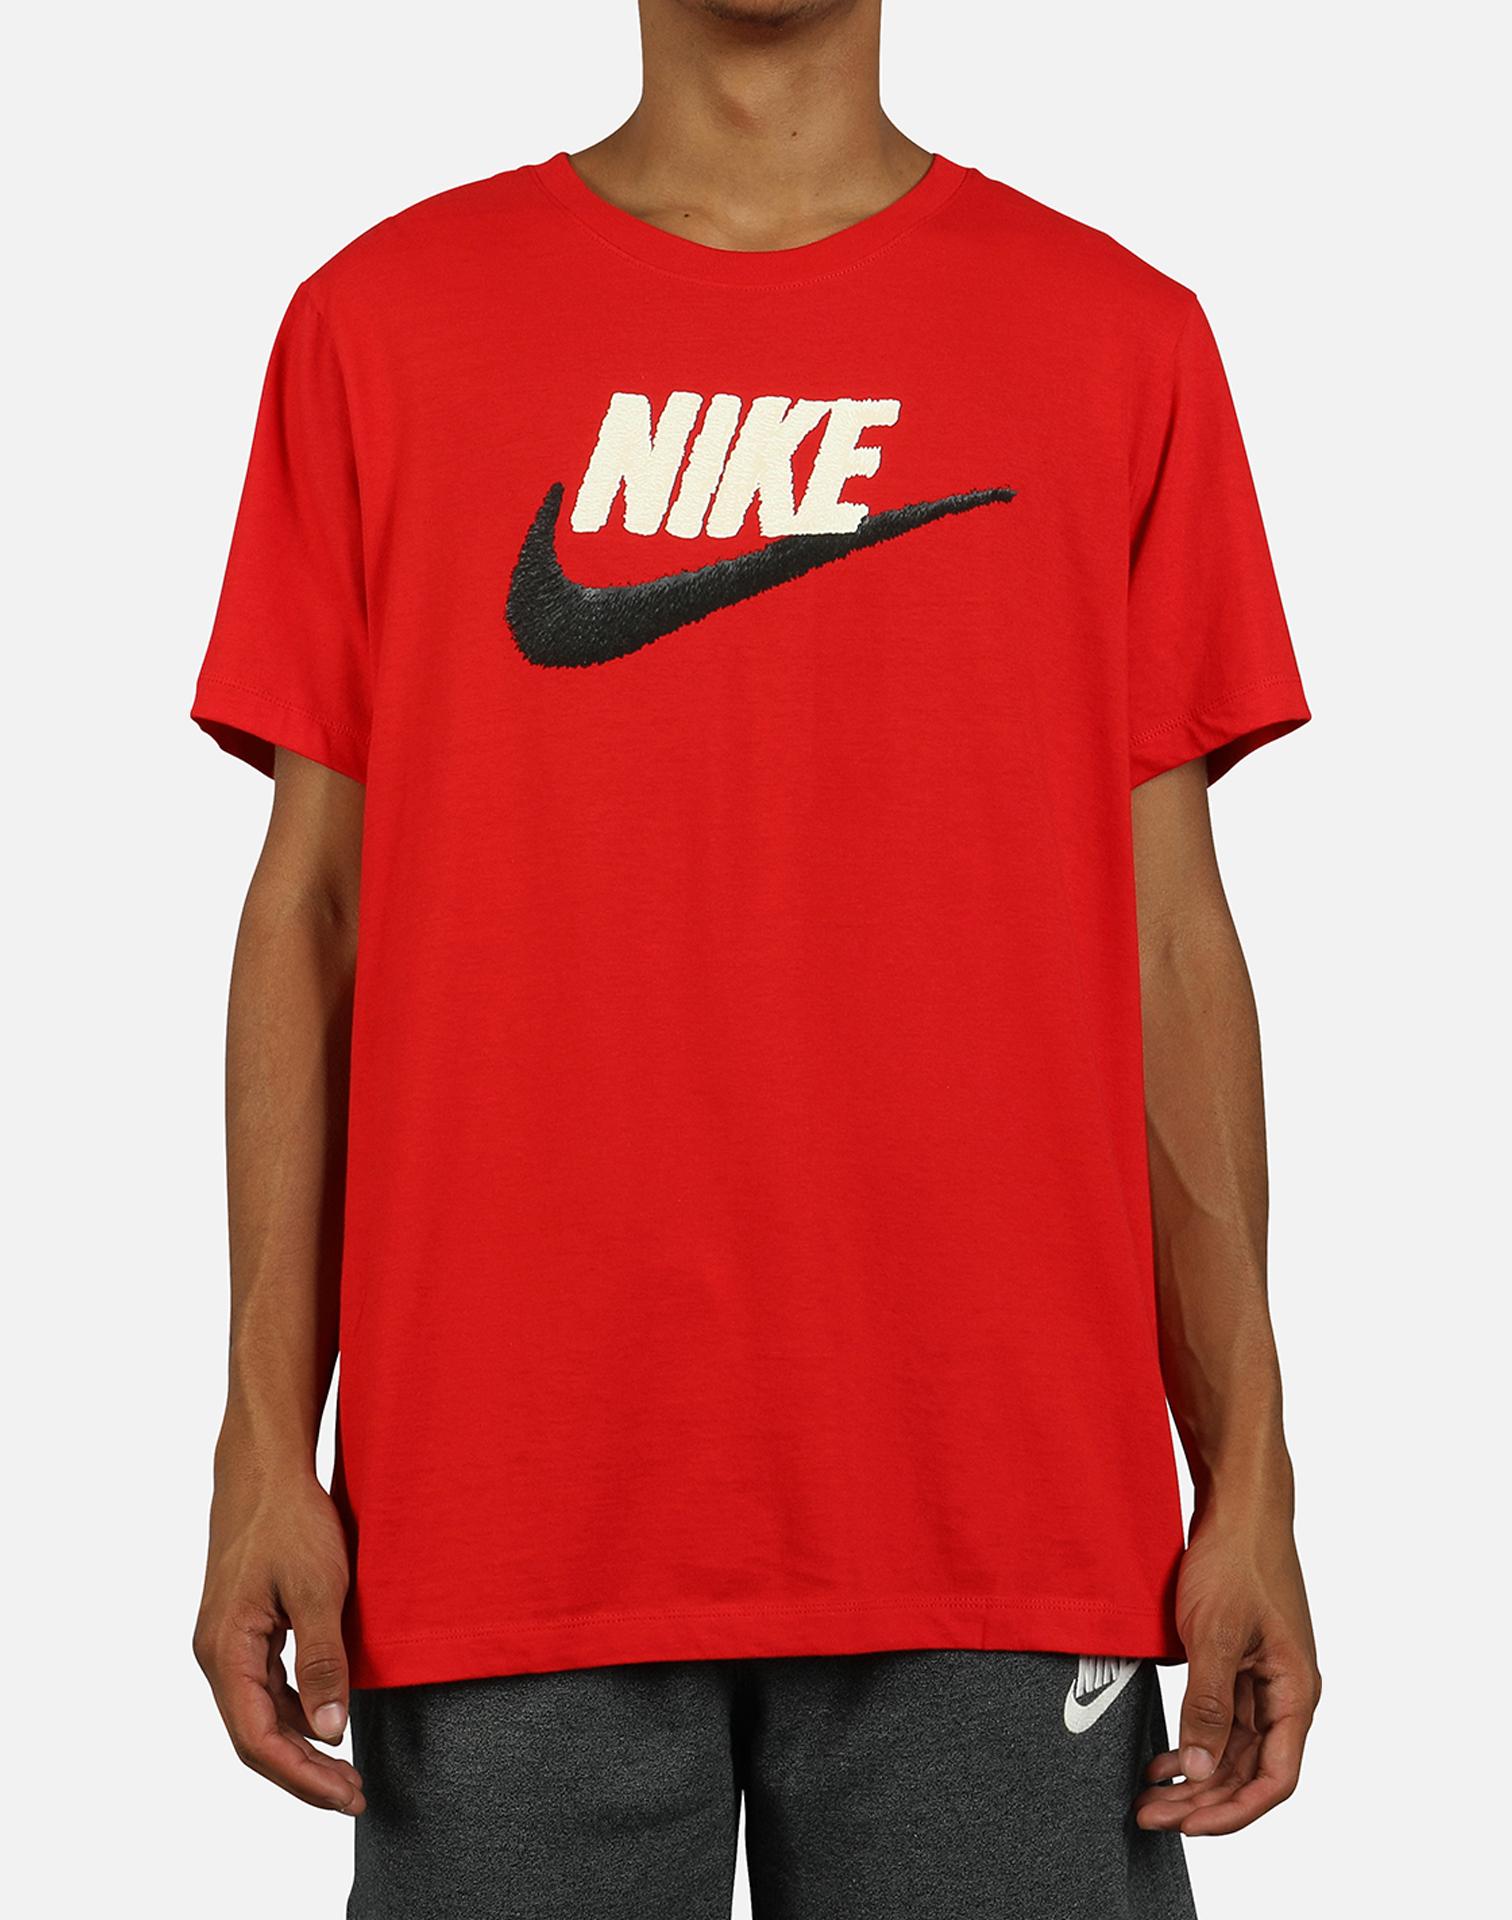 Nike Swoosh Logo T-shirt in Red for Men - Save 28% - Lyst